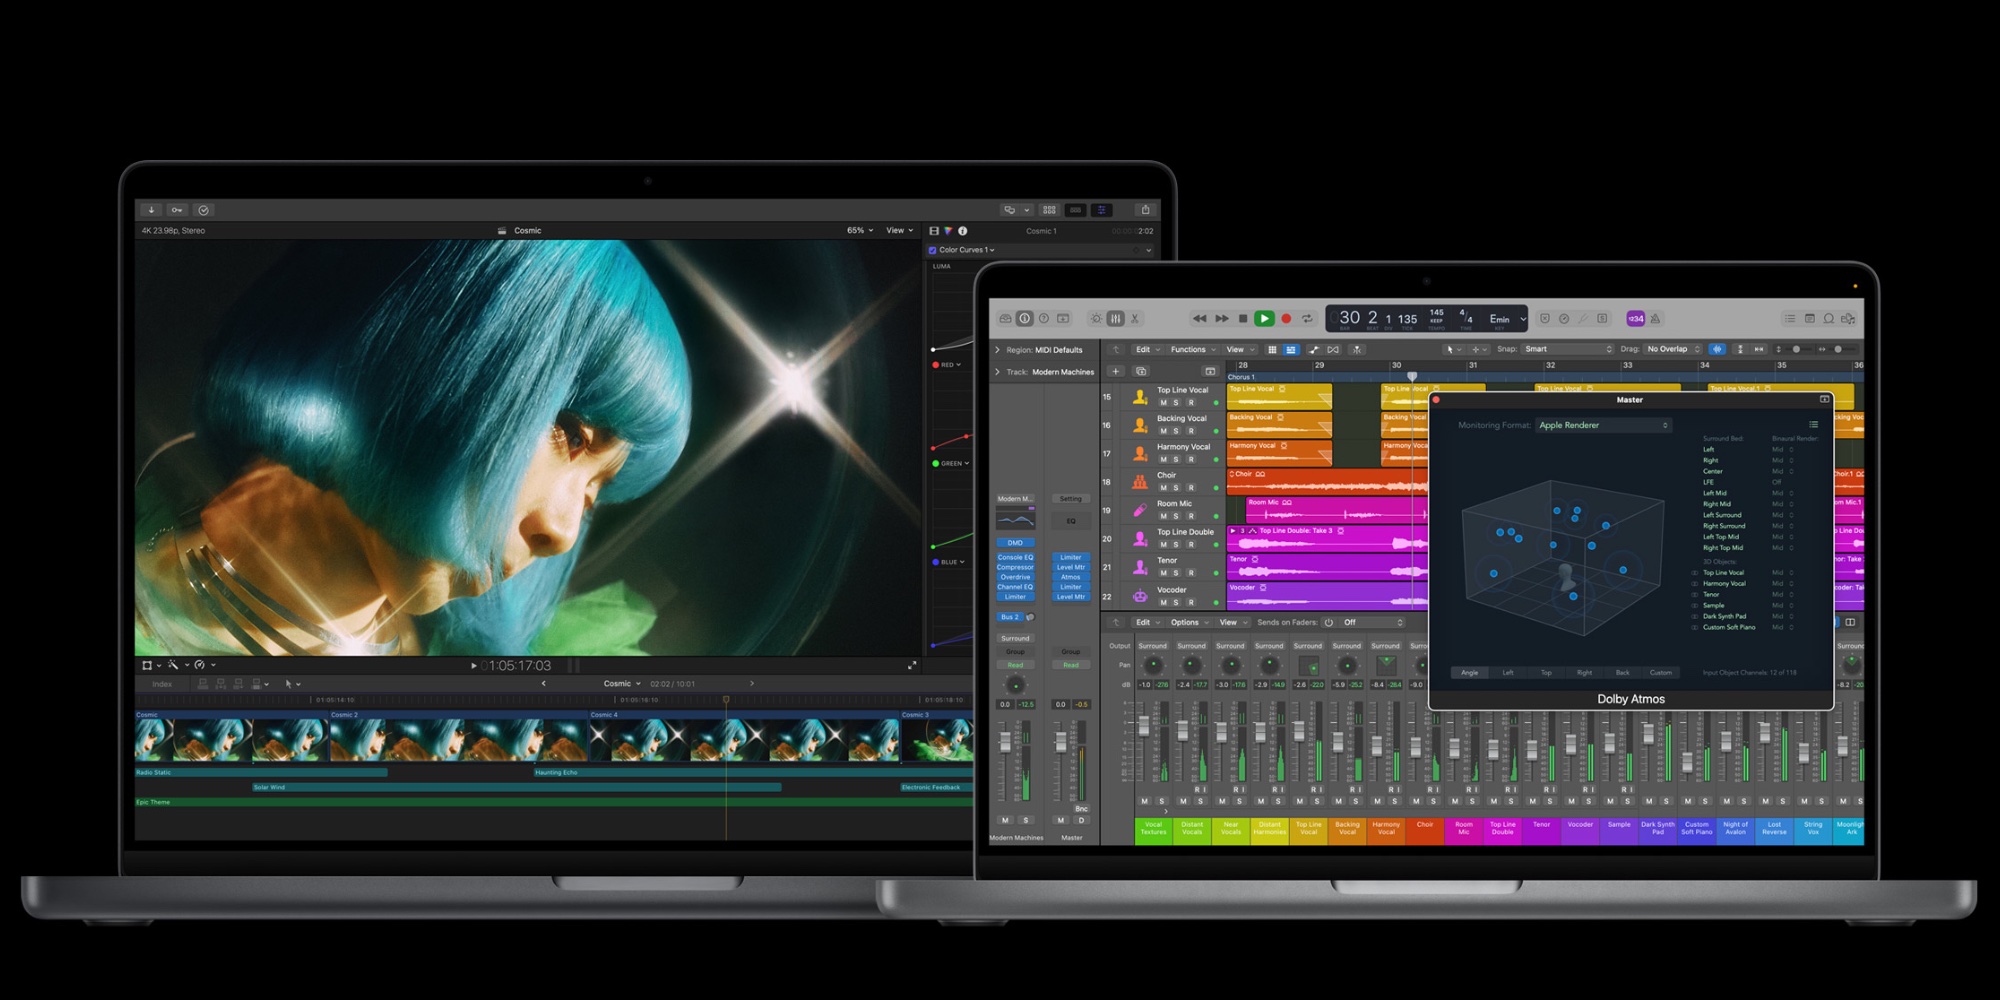 M2 Pro and M2 Max MacBook Pro - News with Apple! - Morningdew Media